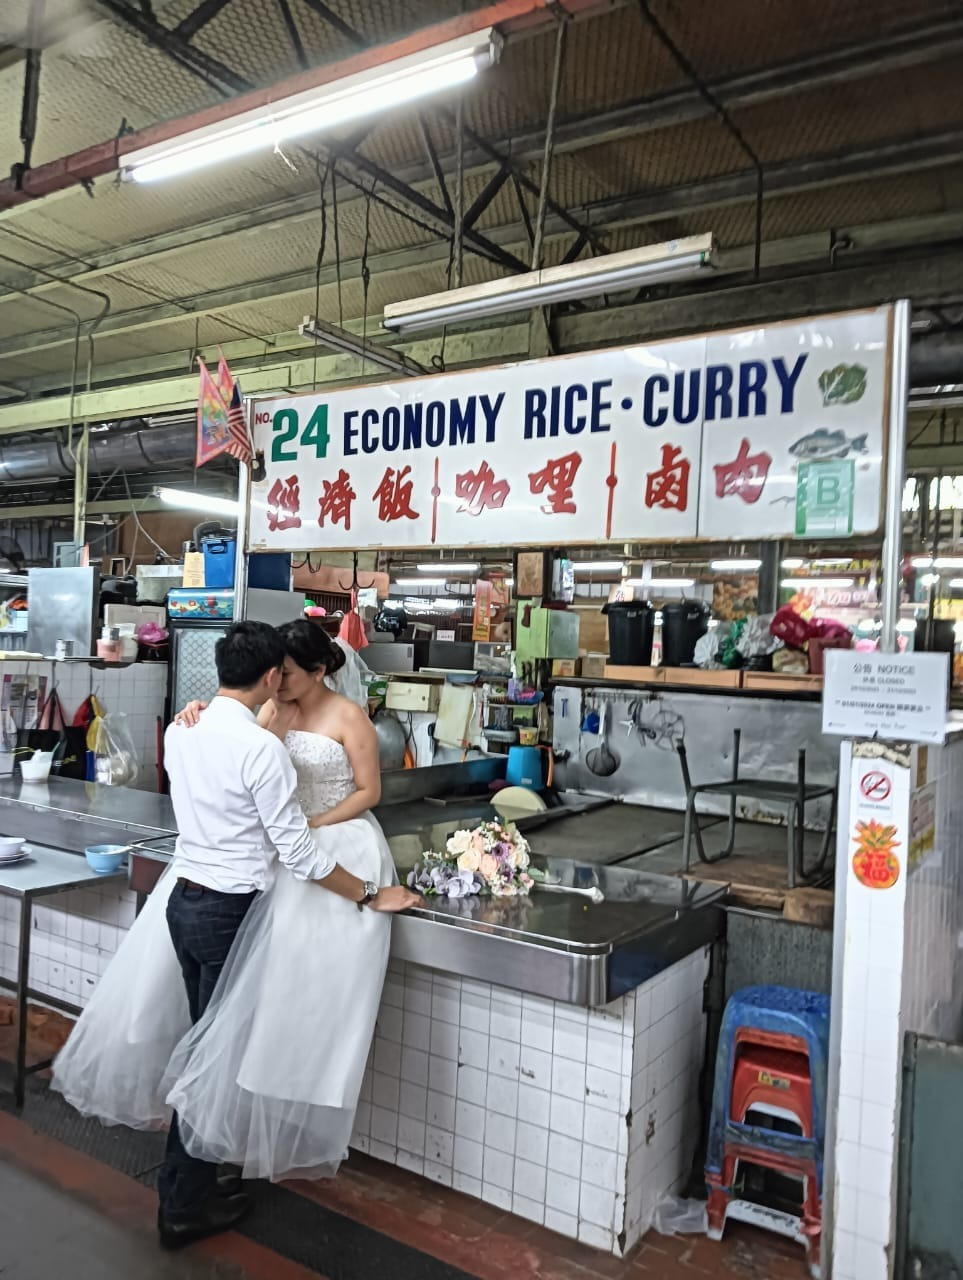 Penang couple has wedding photoshoot at market food court, netizens joke they must have 1st met there | weirdkaya